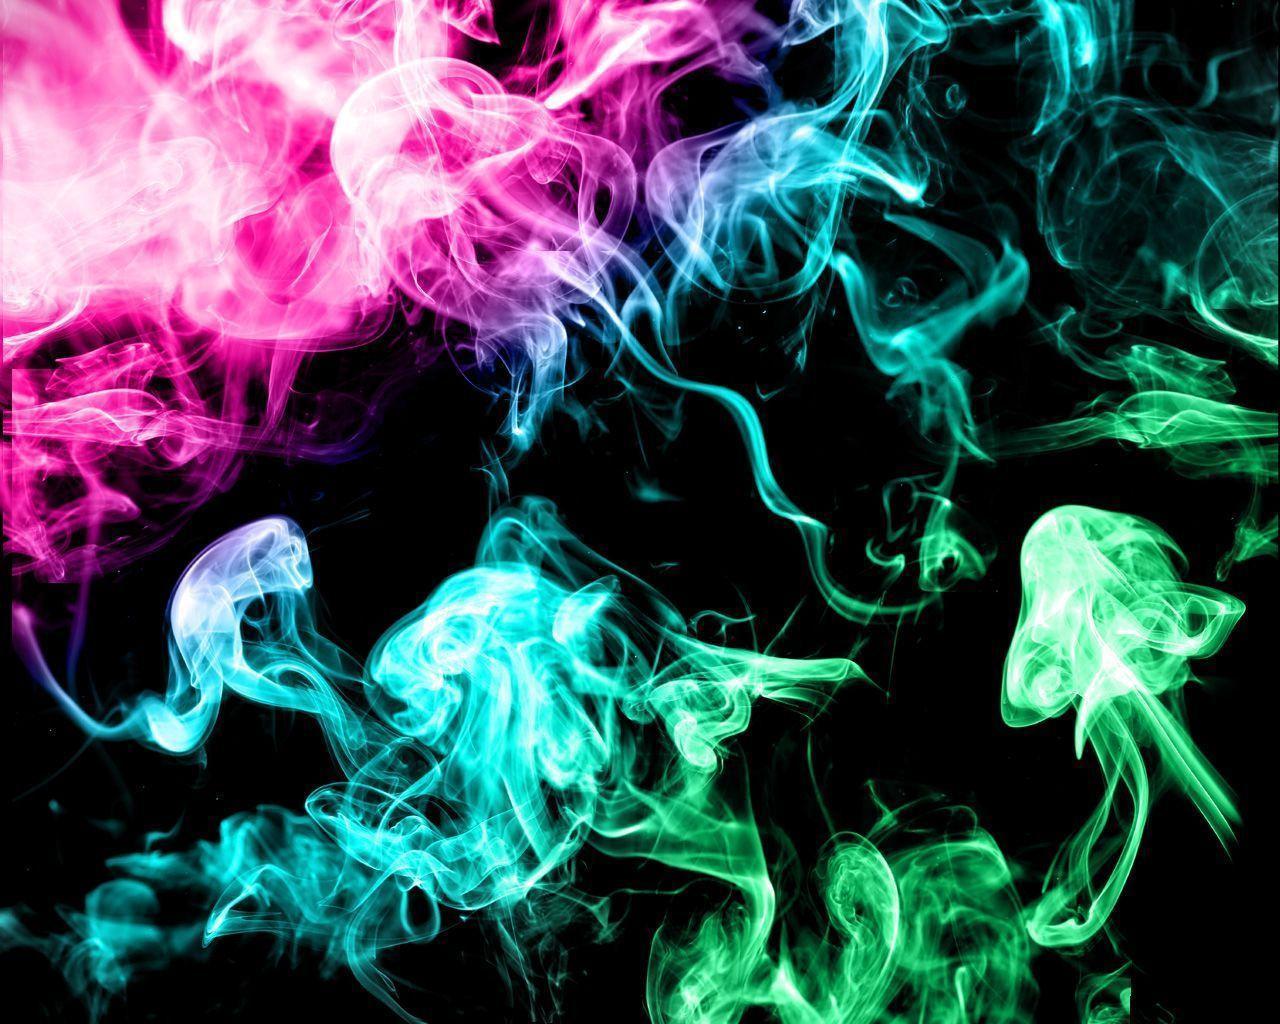 Wallpaper For > Weed Smoke Background Tumblr